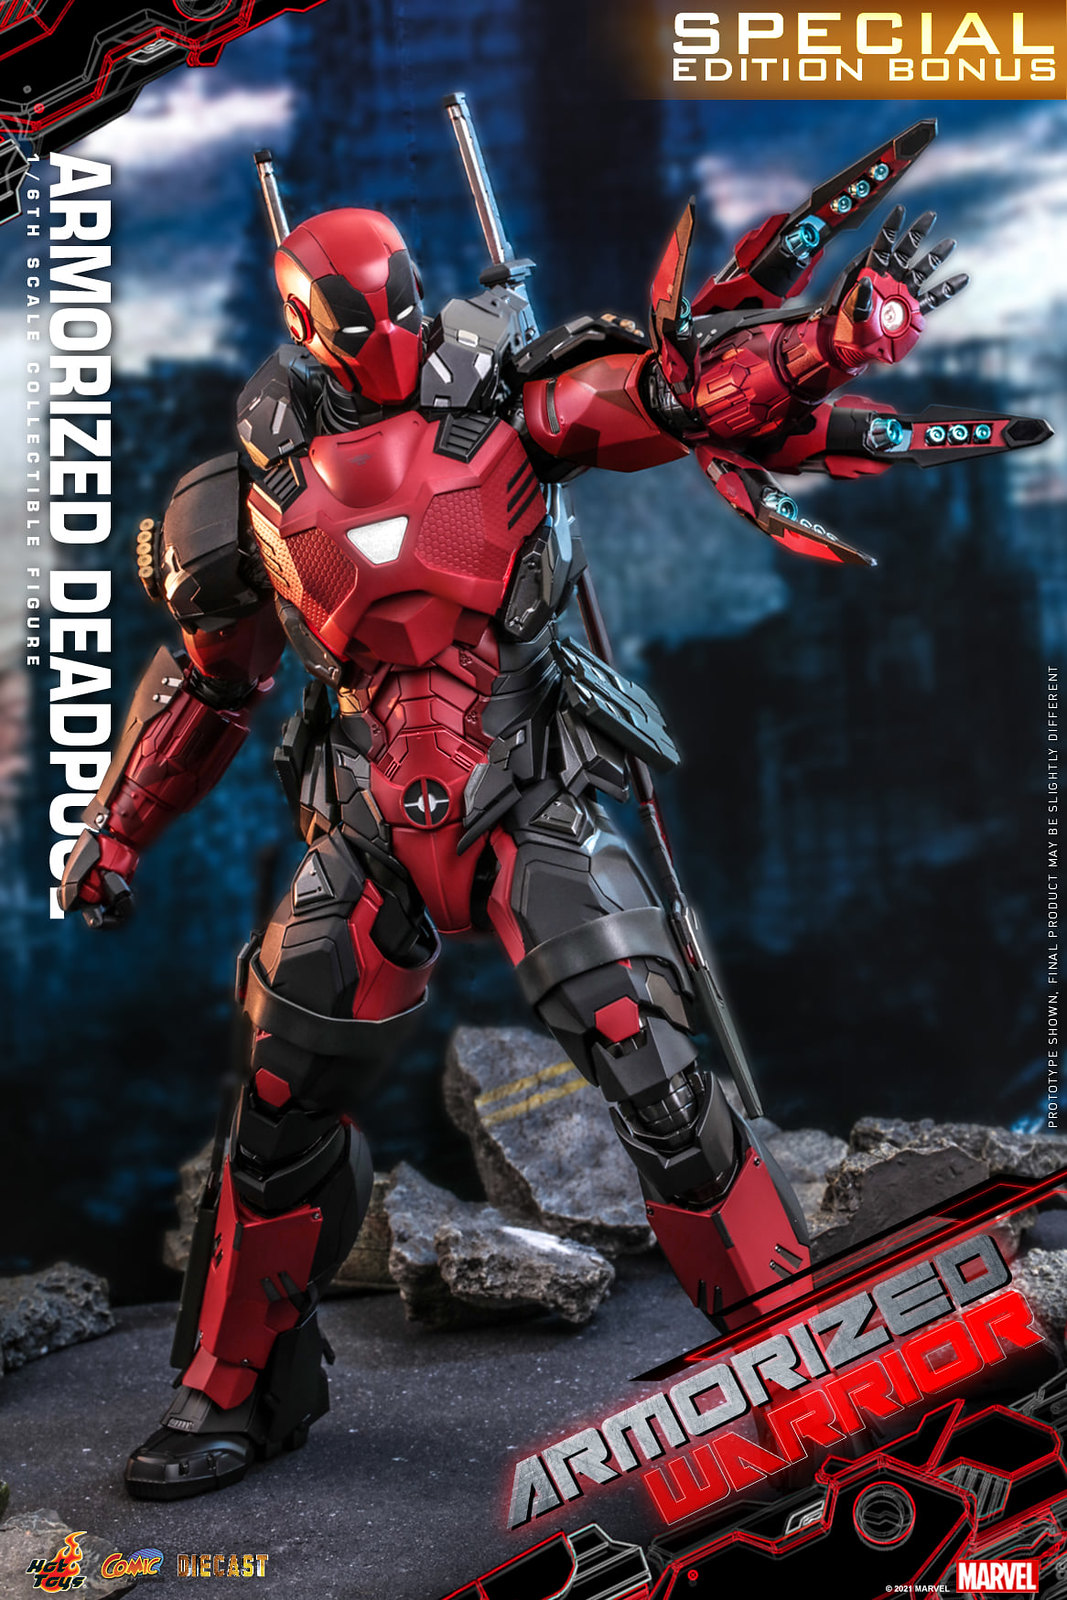 NEW PRODUCT: Hot Toys Armorized Warrior - 1/6th scale Armorized Deadpool Collectible Figure [Armorized Warrior Collection] 51312242930_19b98a5092_h